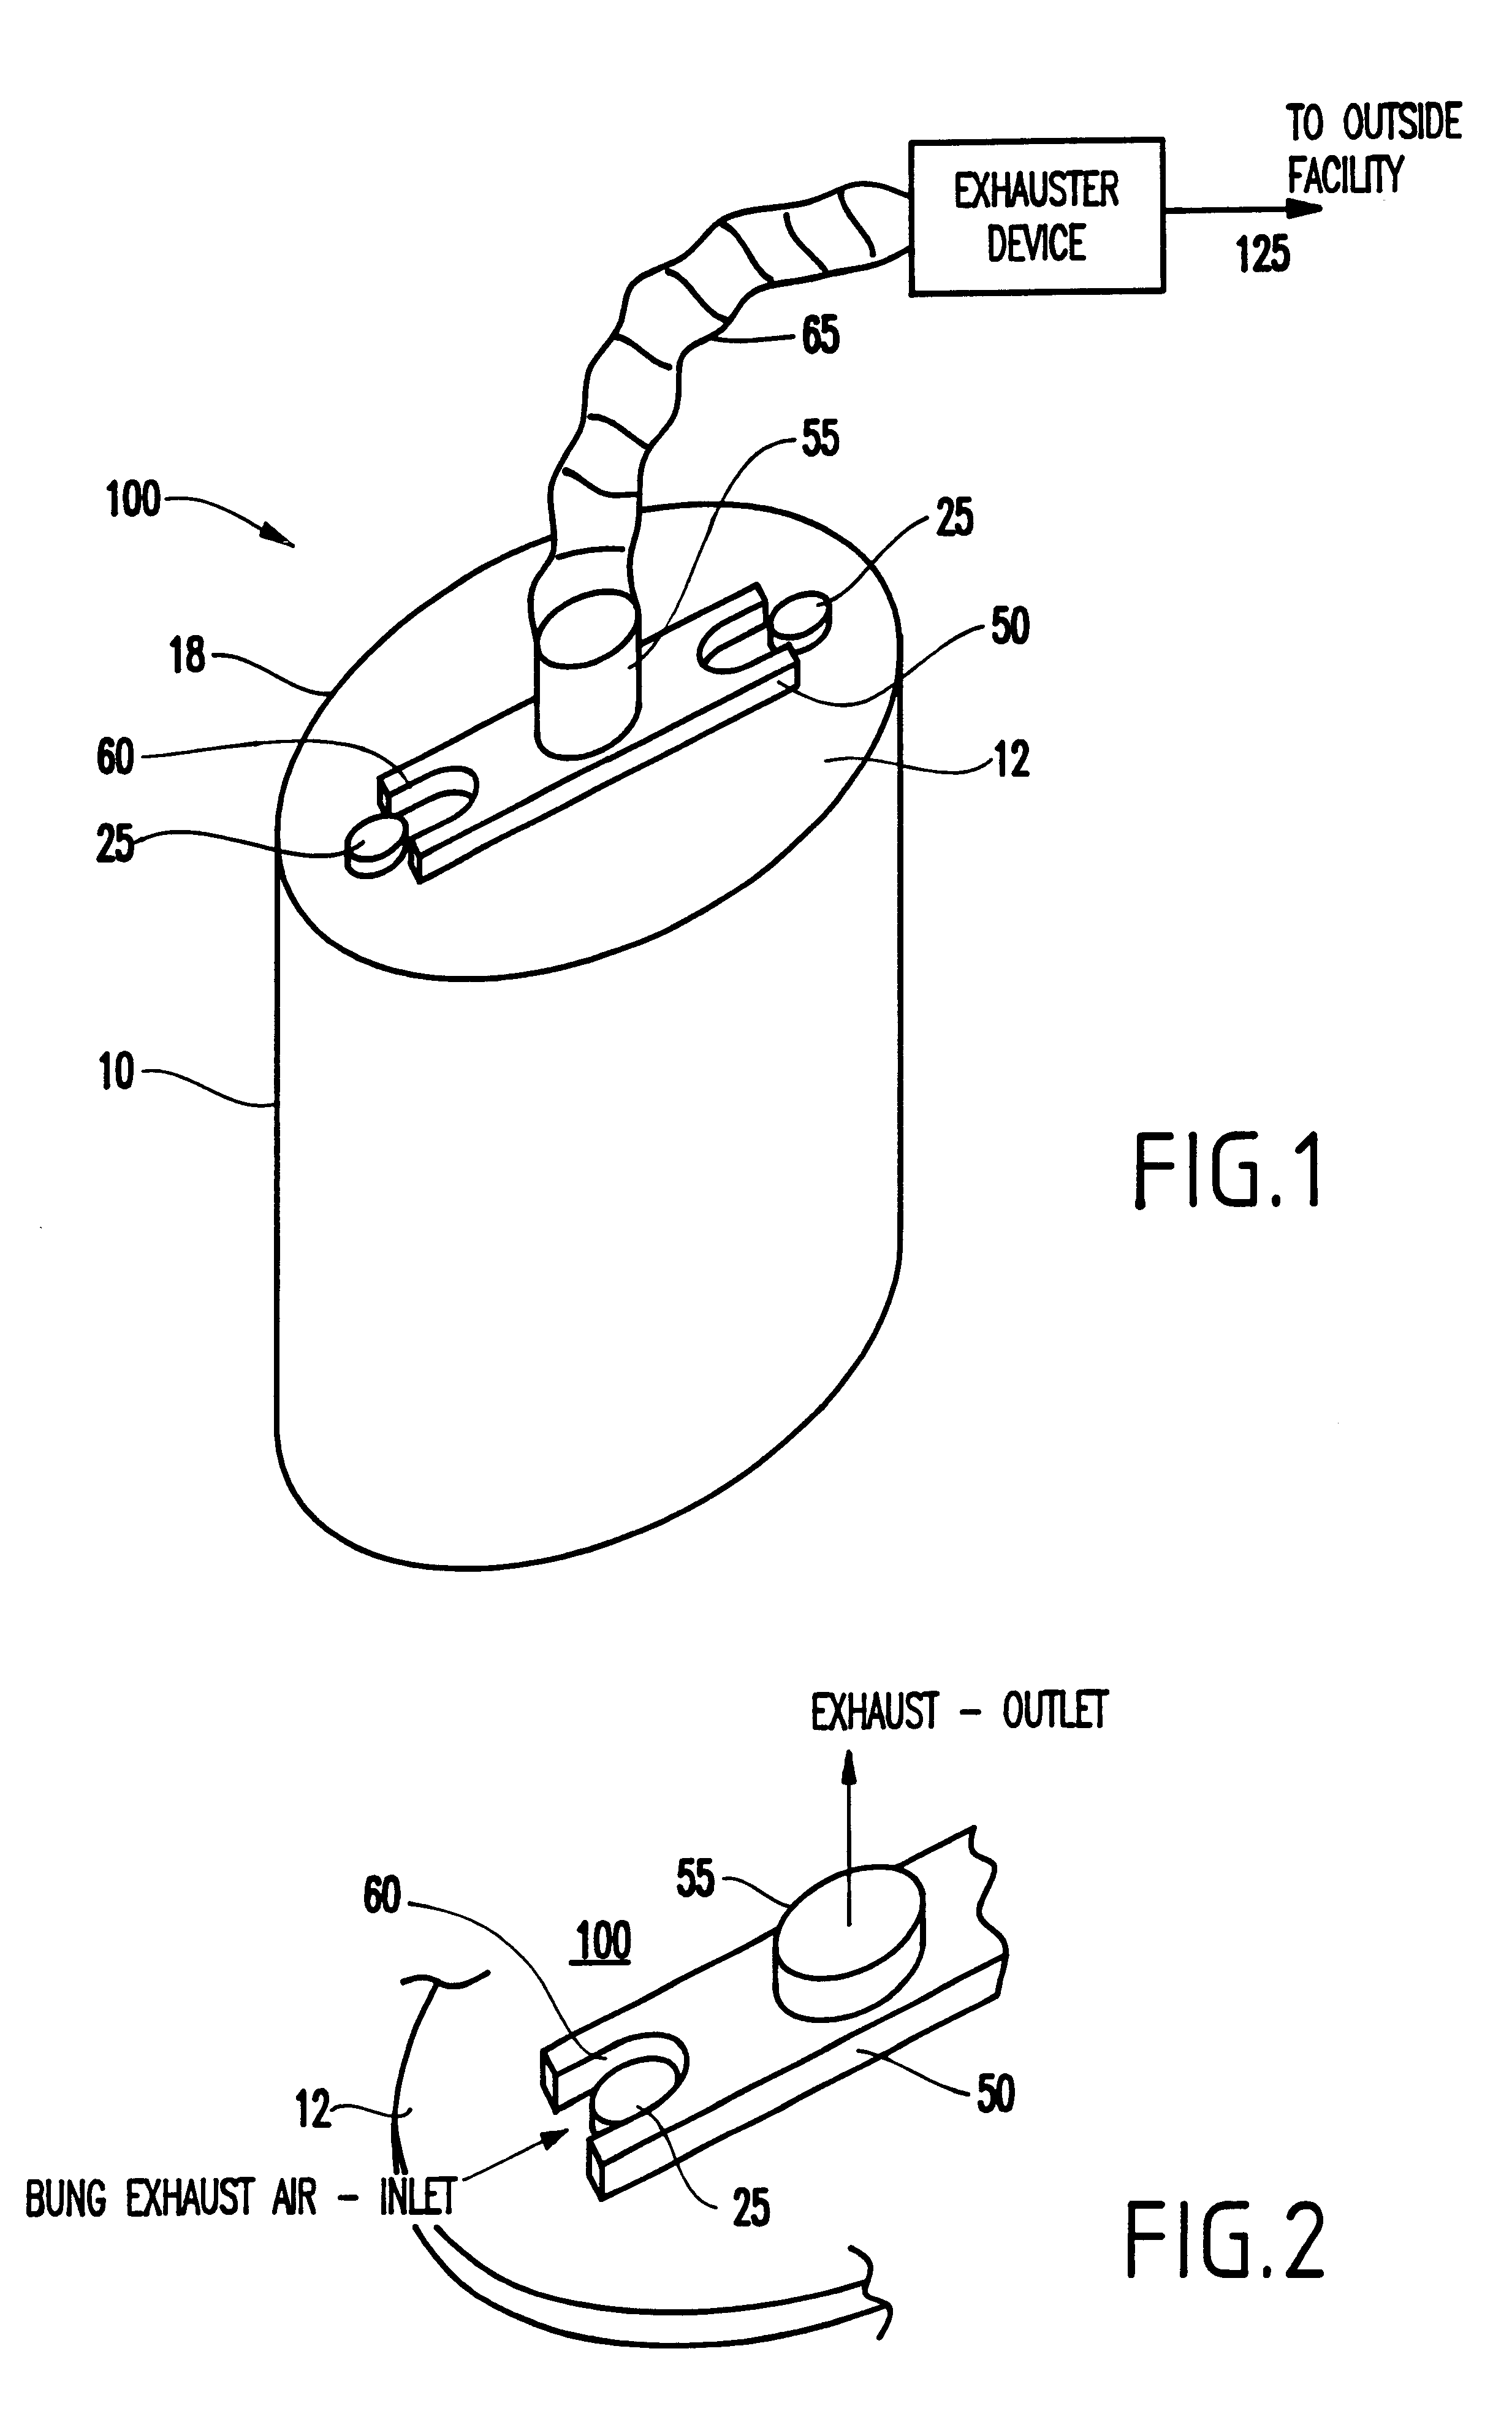 Venting device for hazardous material containers